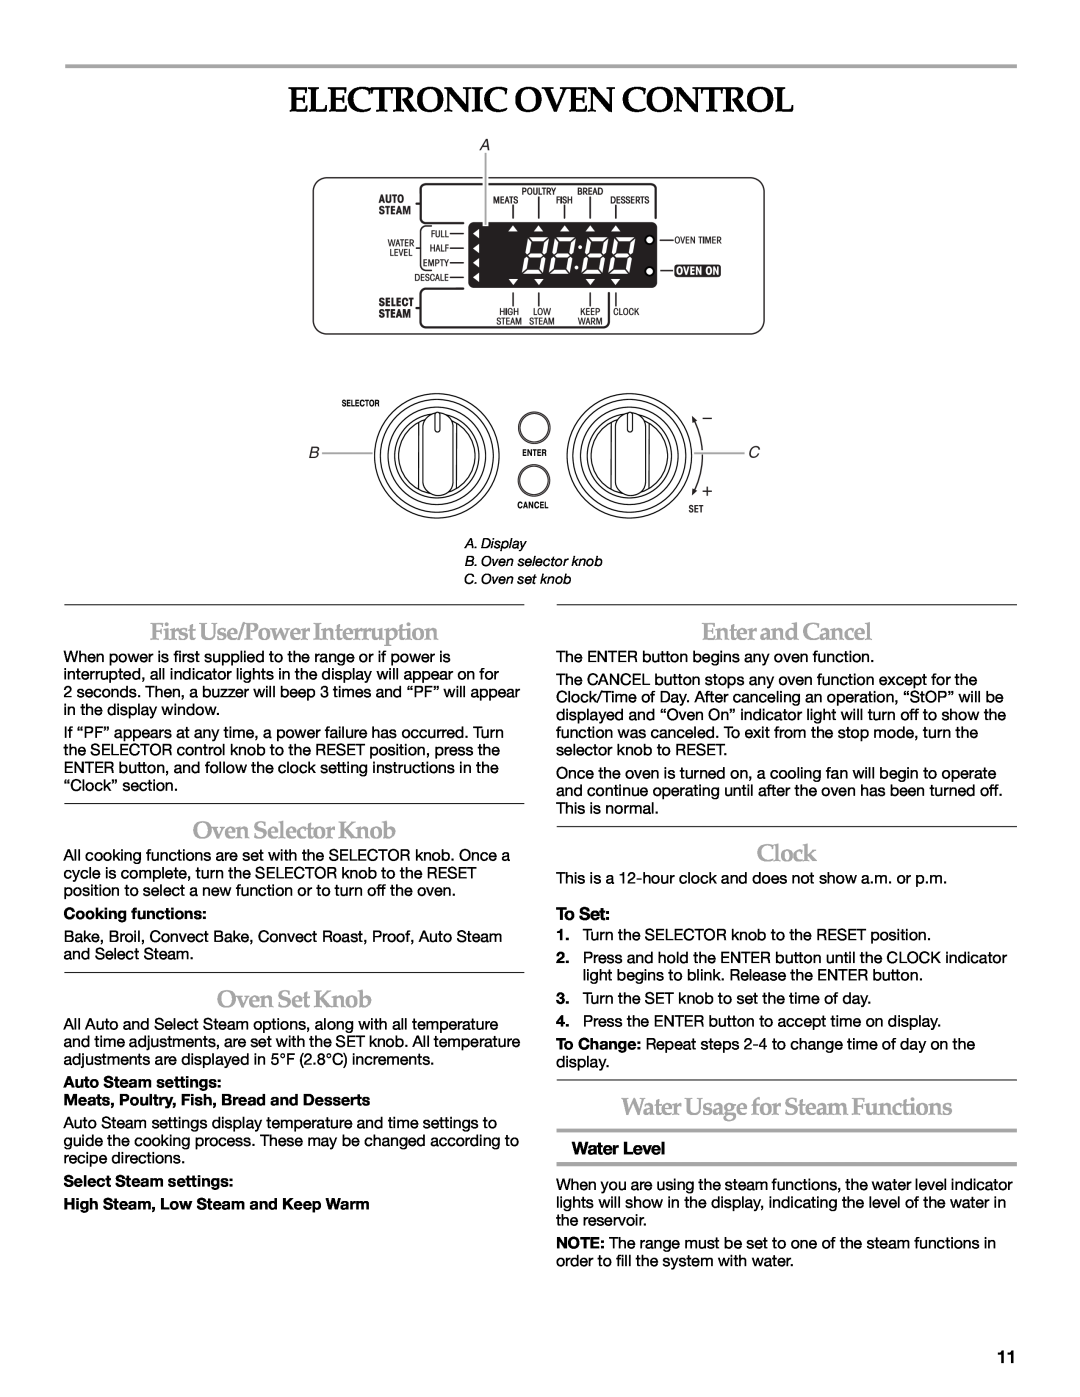 KitchenAid YKDRP767 Electronic Oven Control, FirstUse/Power Interruption, Enter and Cancel, Oven Selector Knob, Clock 